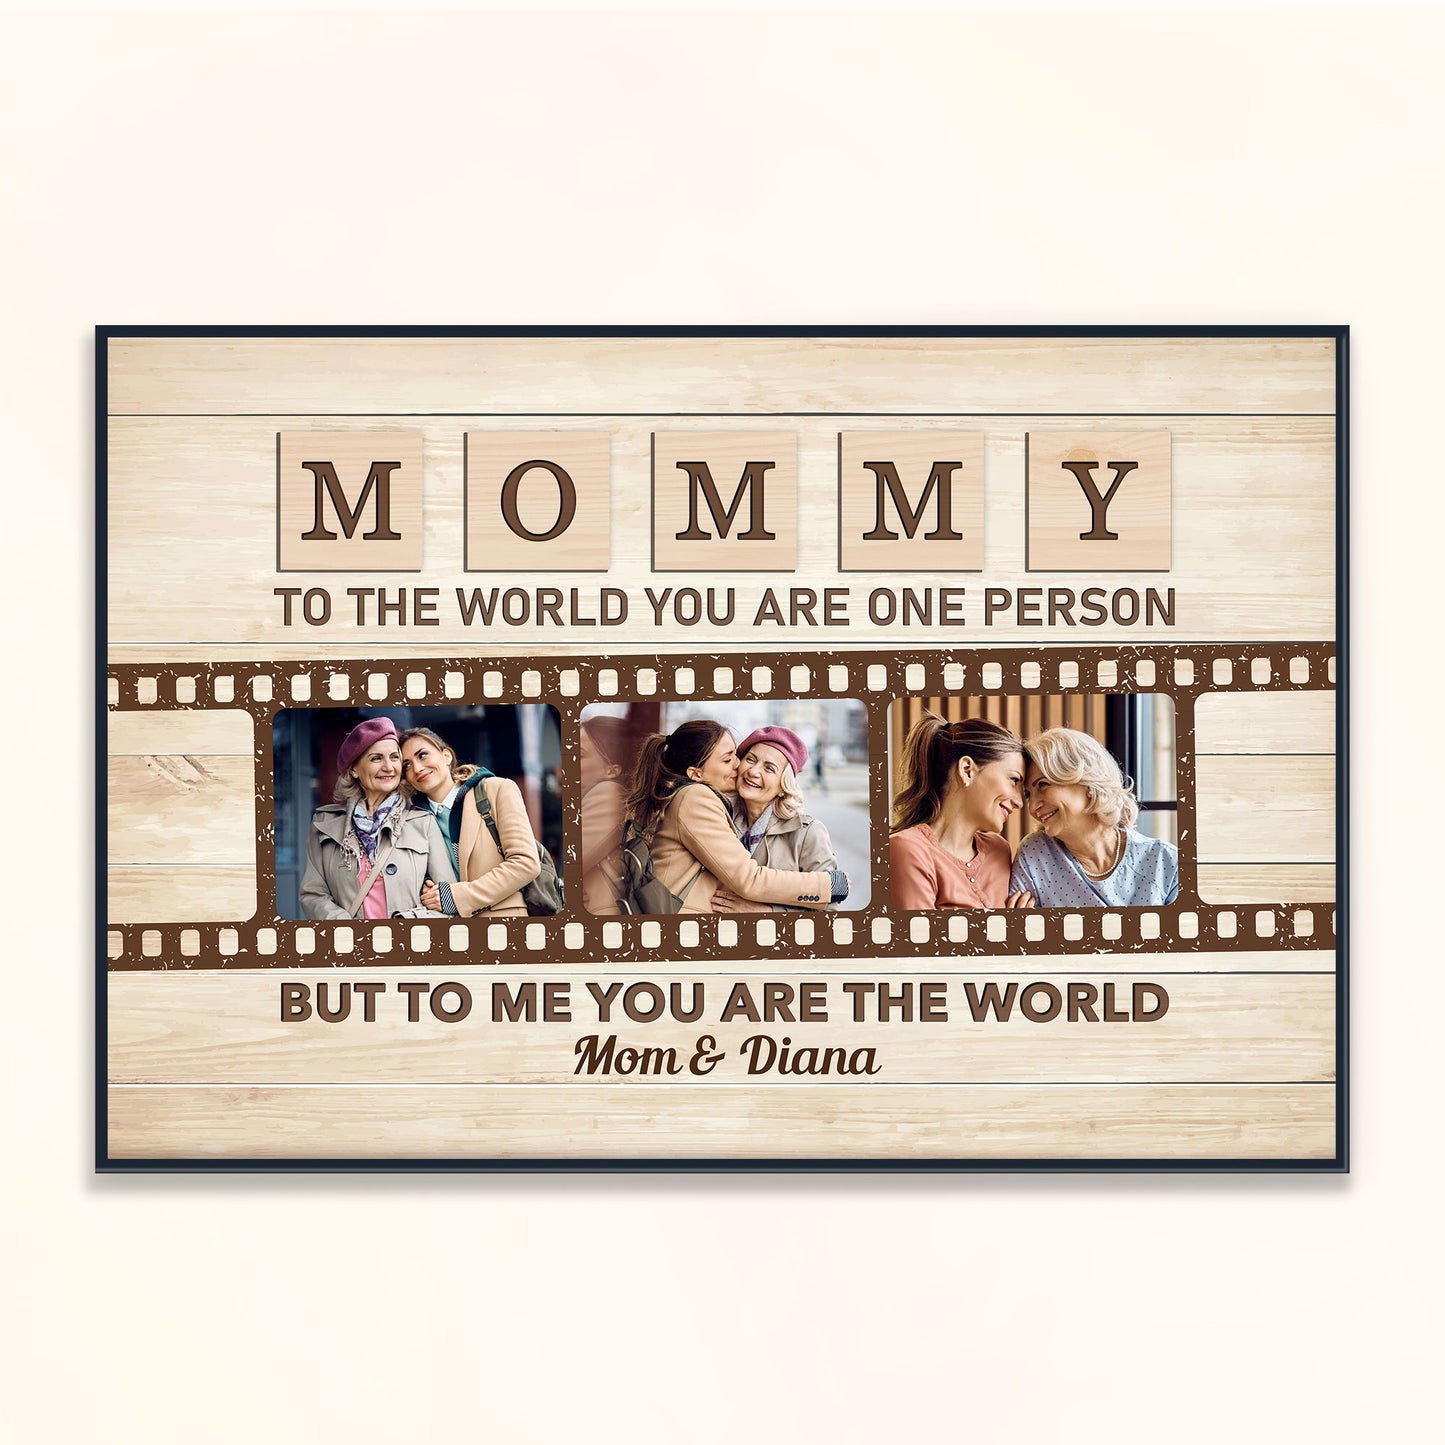 Mommy To The World You Are One Person But To Us You Are The World - Personalized Photo Poster/Wrapped Canvas - Loving, Mother's Day Gift For Mom